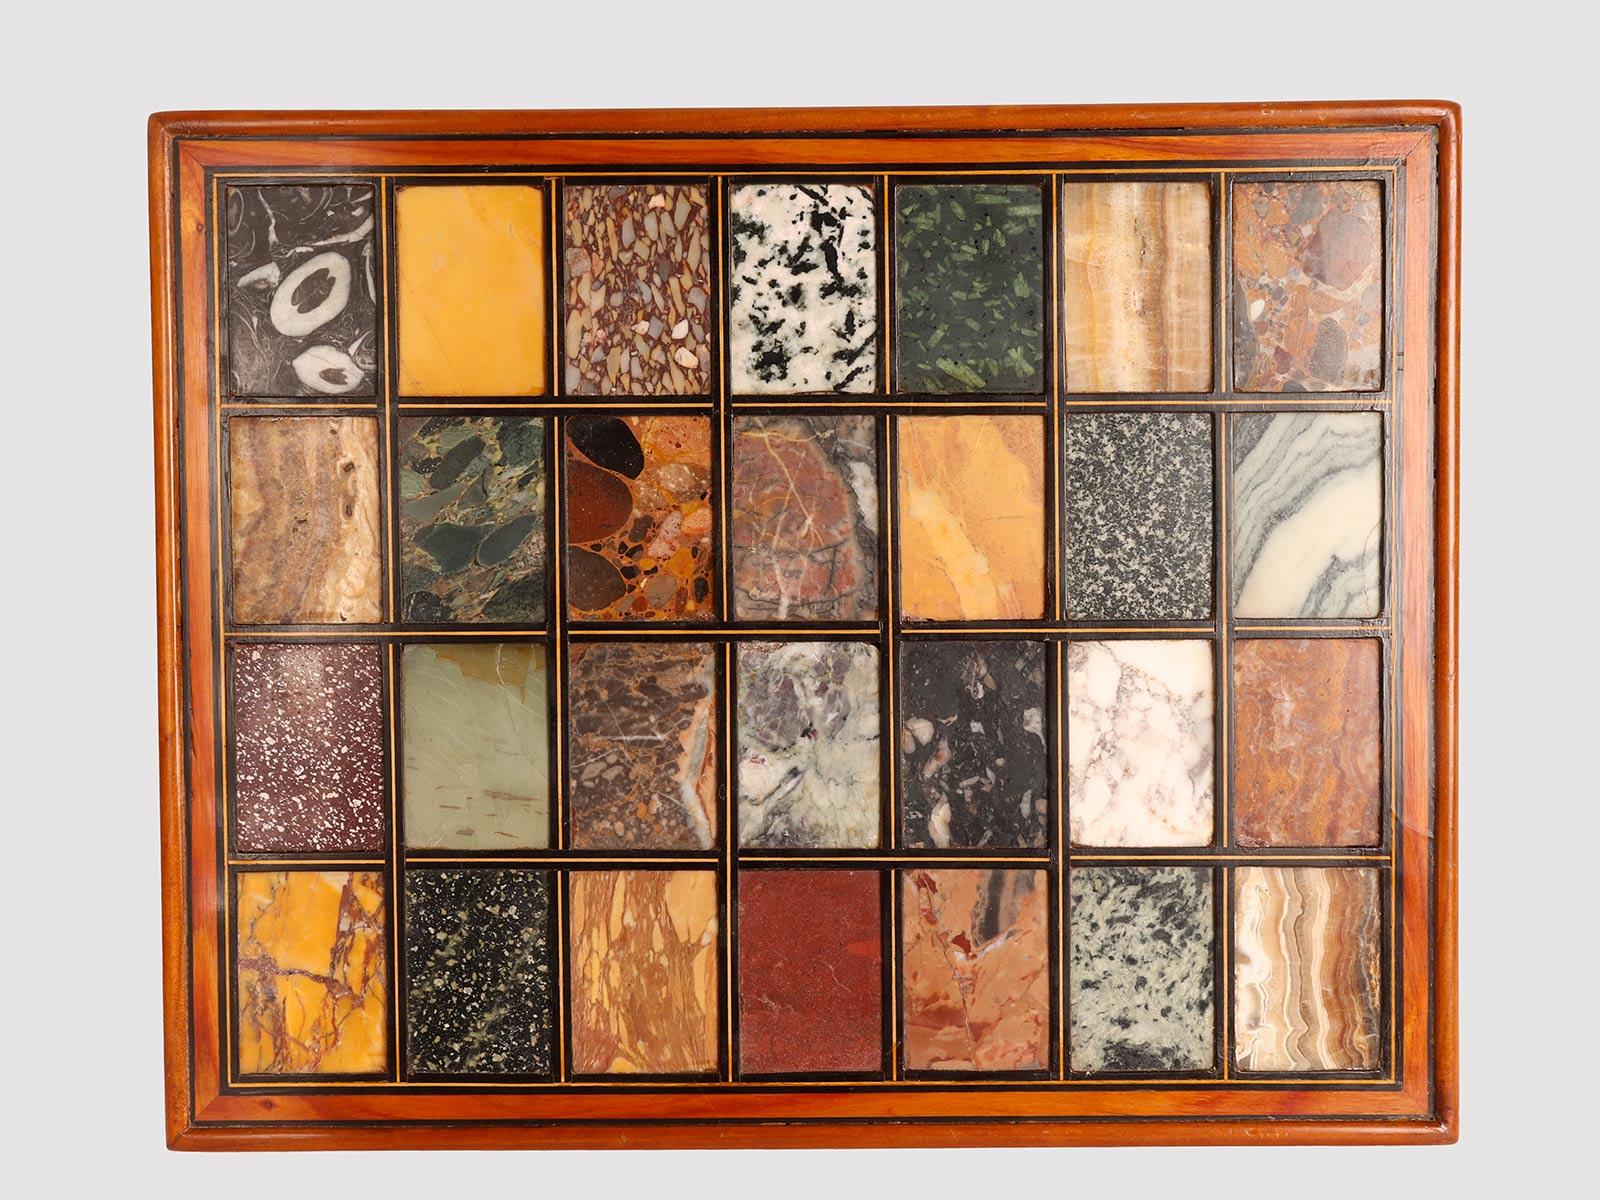 A selection of antique Grand Tour marbles. In an inclined display structure made of lacquered cherry wood and profiled in black (ebony wood), a collection of twenty-eight sample examples of marbles, breccias, ancient porphyries. The marbles are